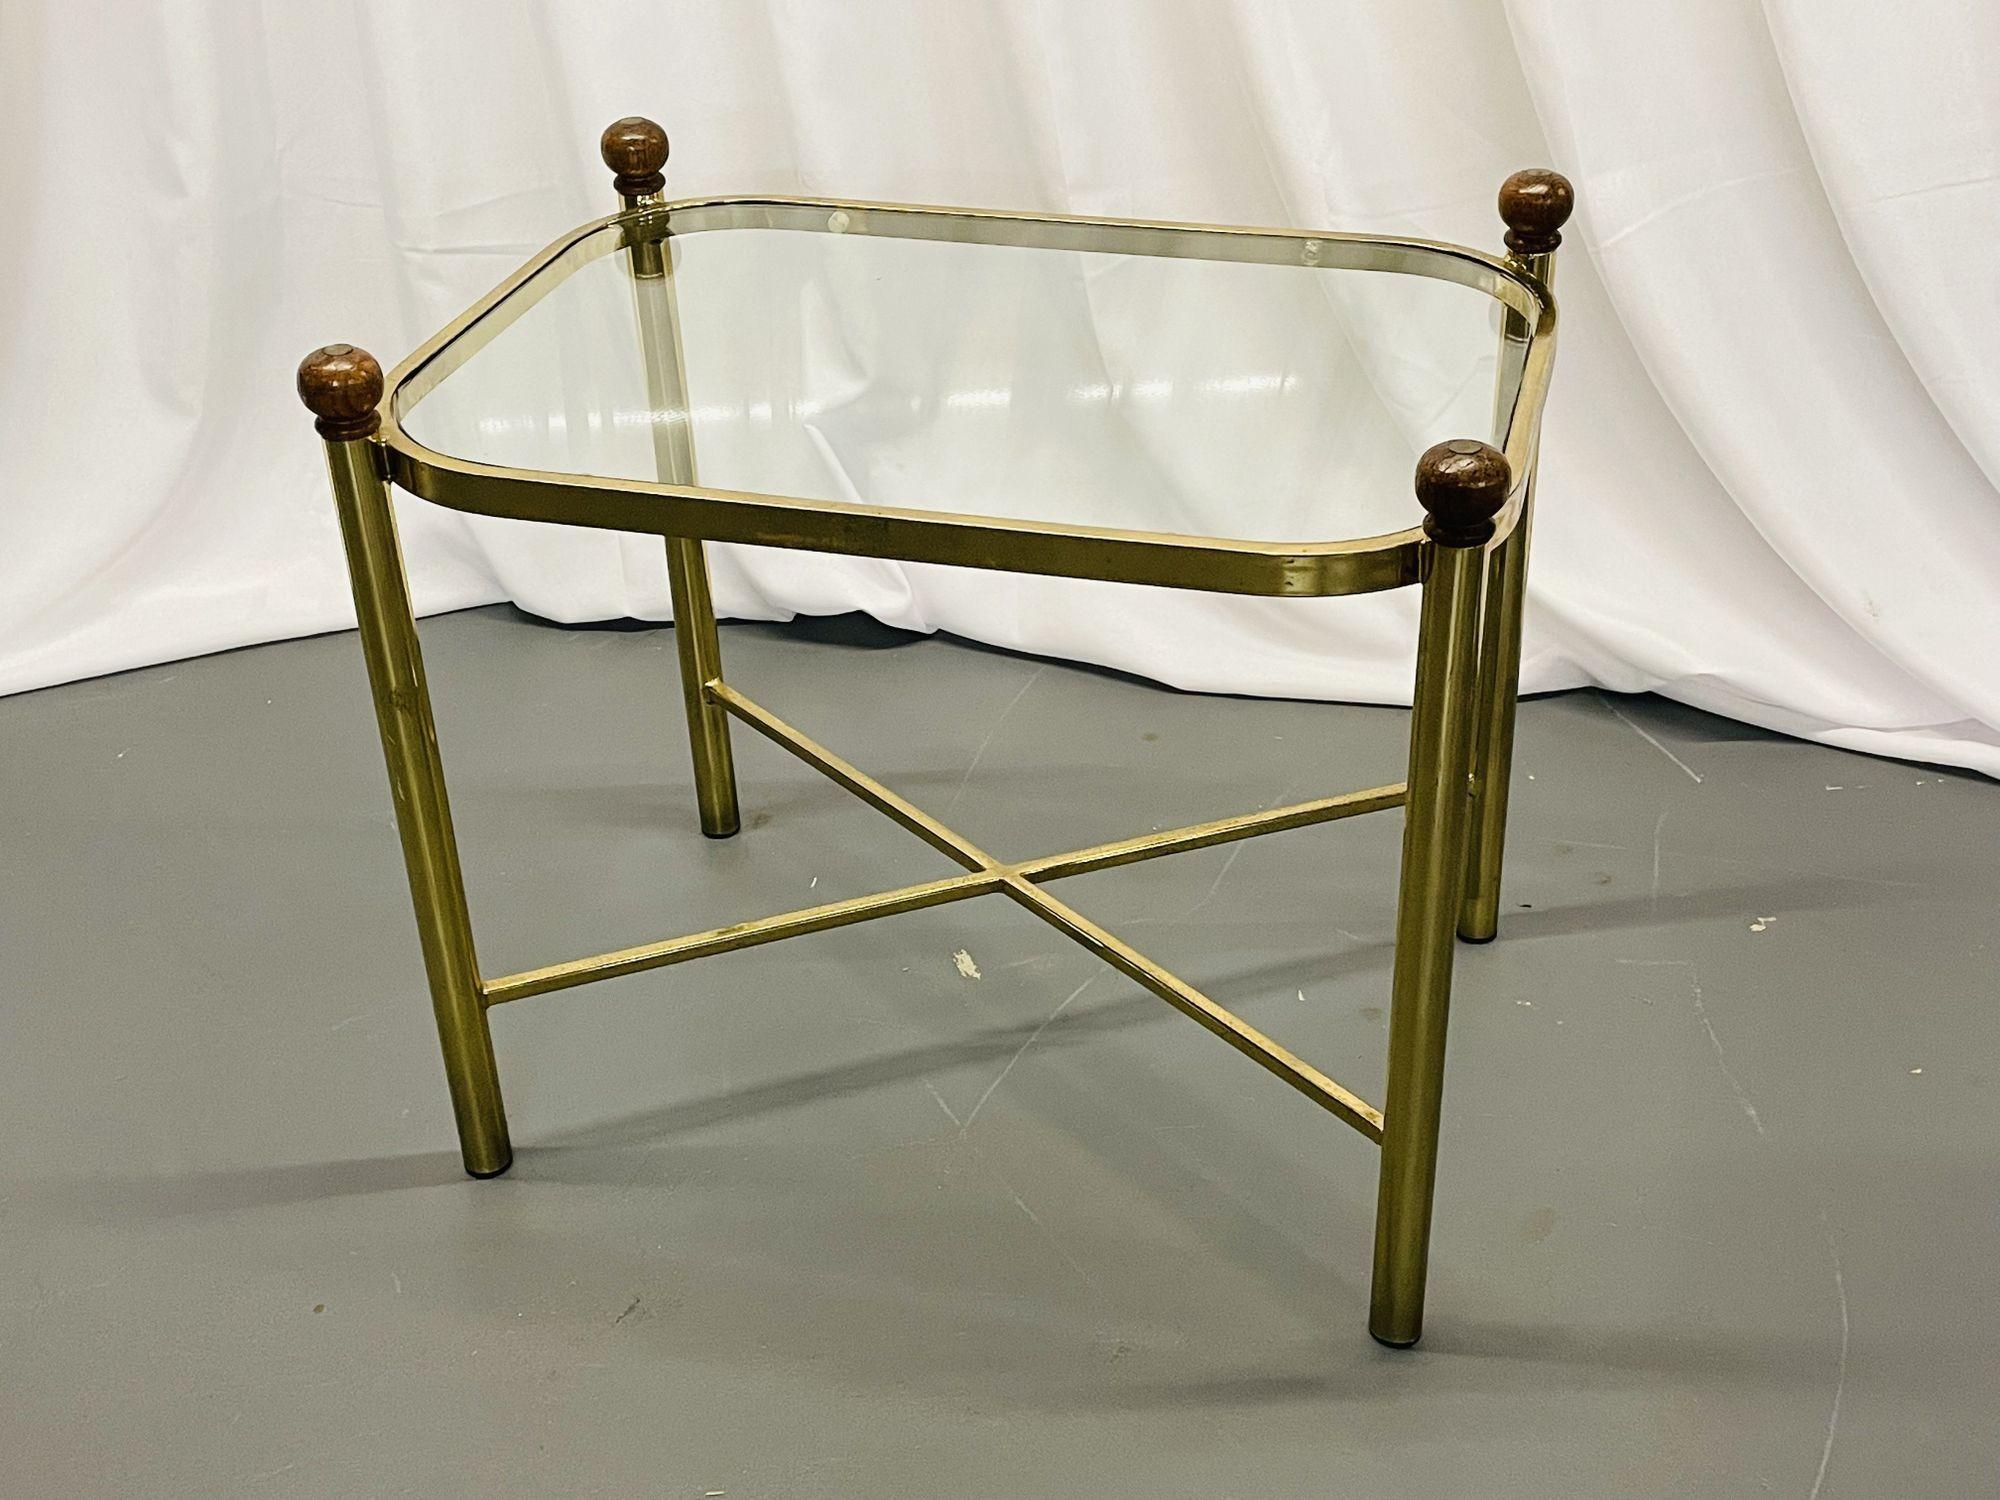 Hollywood Regency Style X-Form coffee or cocktail table, low / side / end table, Gilt Metal, Glass, Wood
 
A gilt metal and glass top mid century modern coffee or low table. The X form metal base supporting a glass top terminating in four barrel